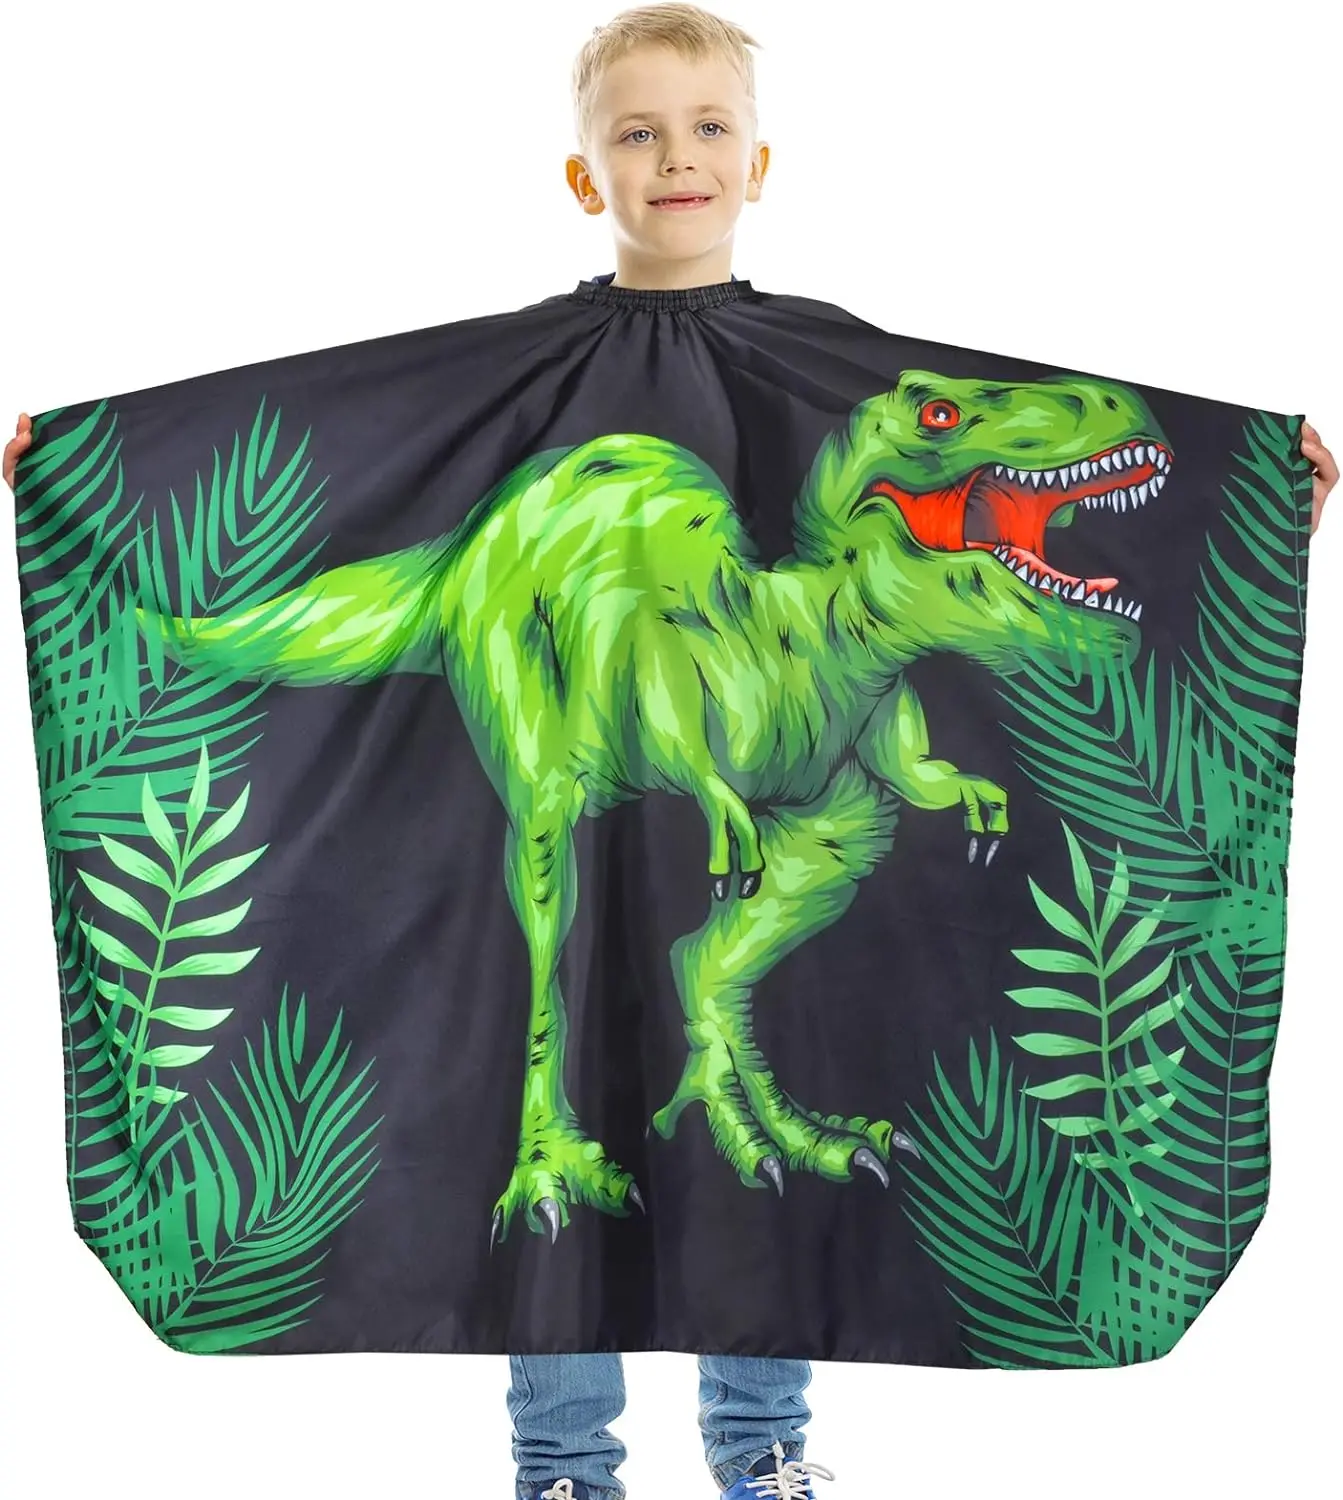 

Professional Barber Salon Dinosaur Hair Cutting Cape for Boys with Adjustable Snap Closure